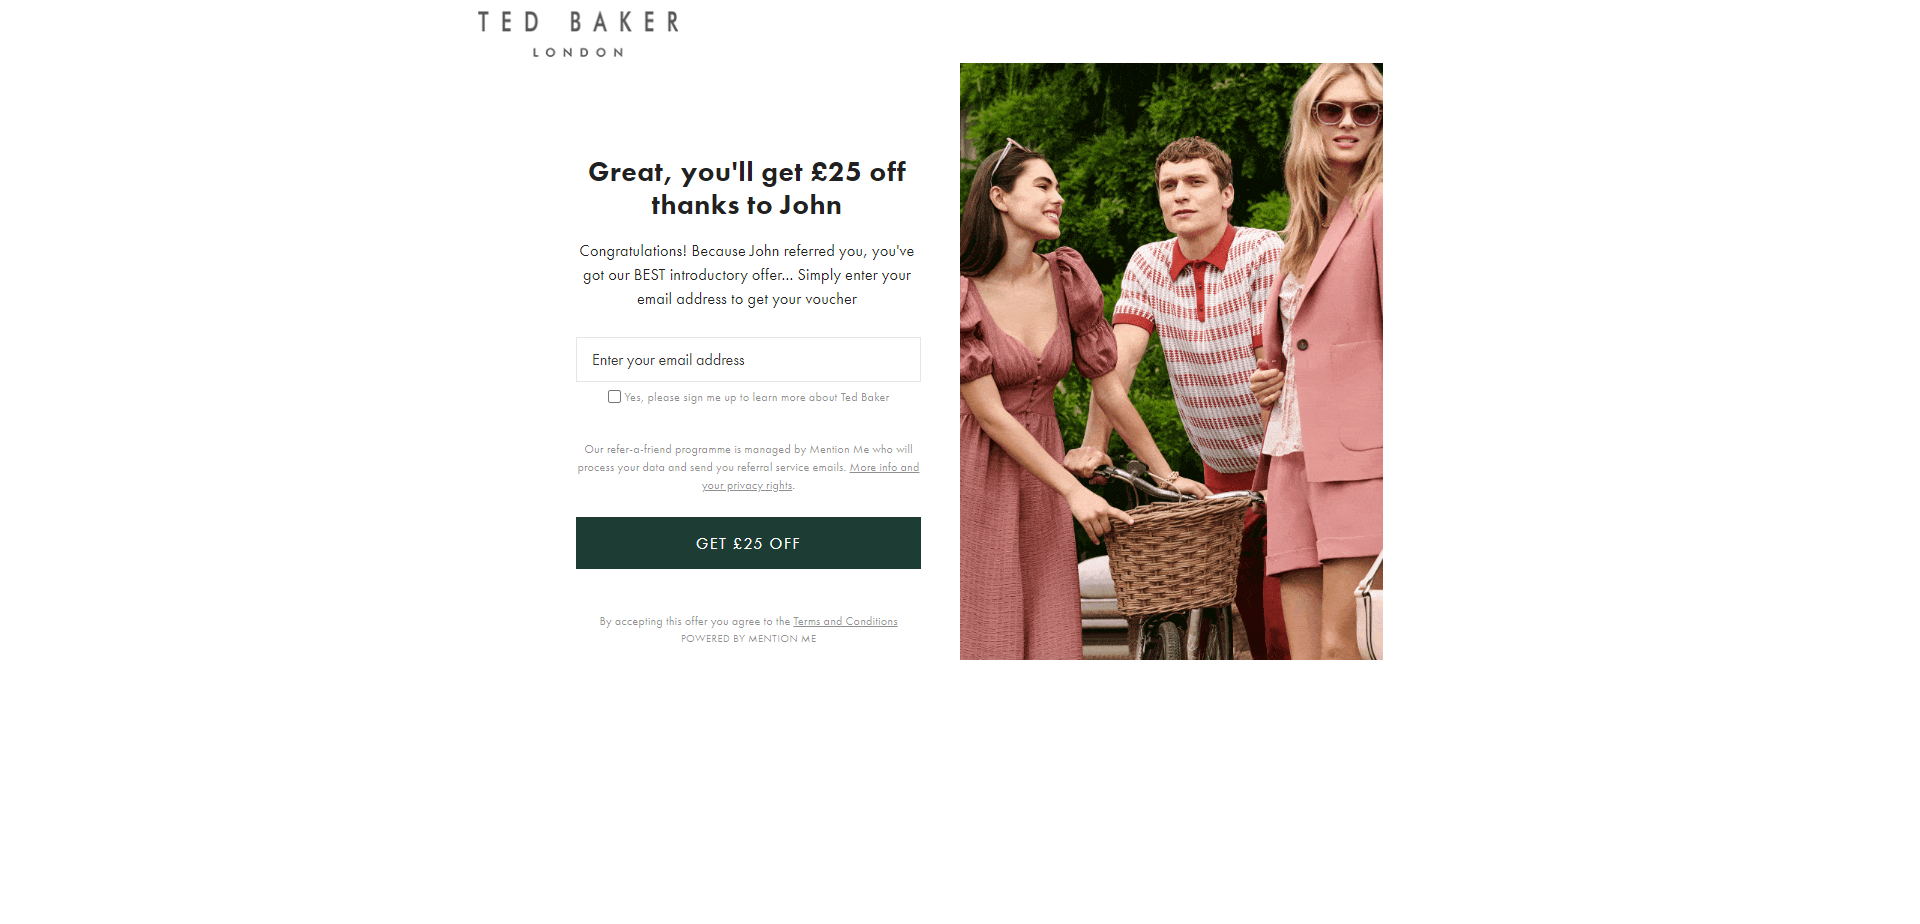 Referral Landing Page for Ted Baker